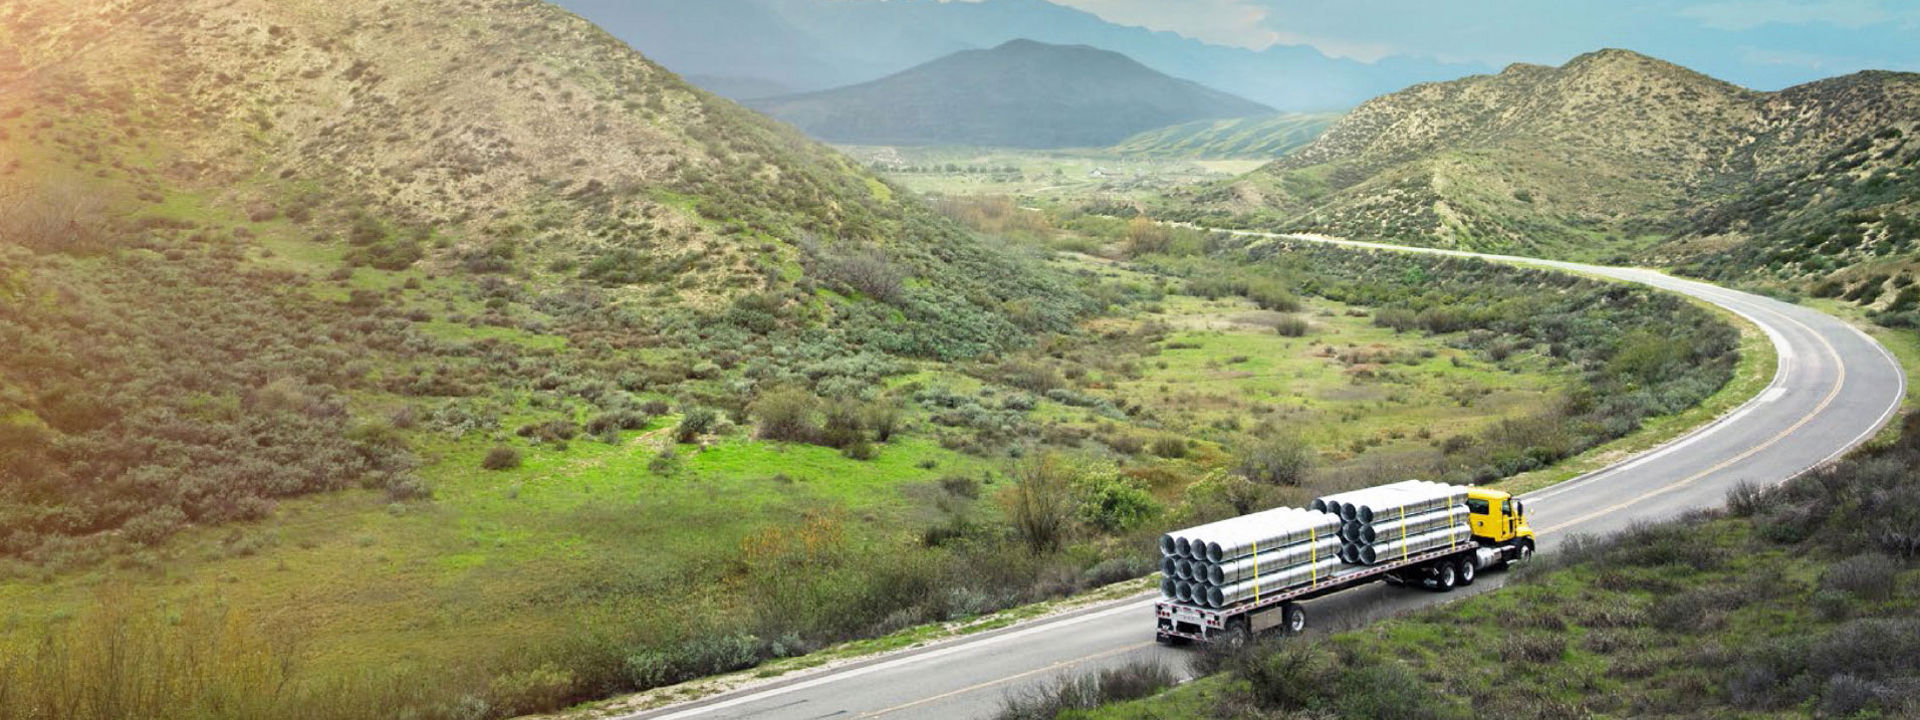 A truck on a highway with mountains in the background.